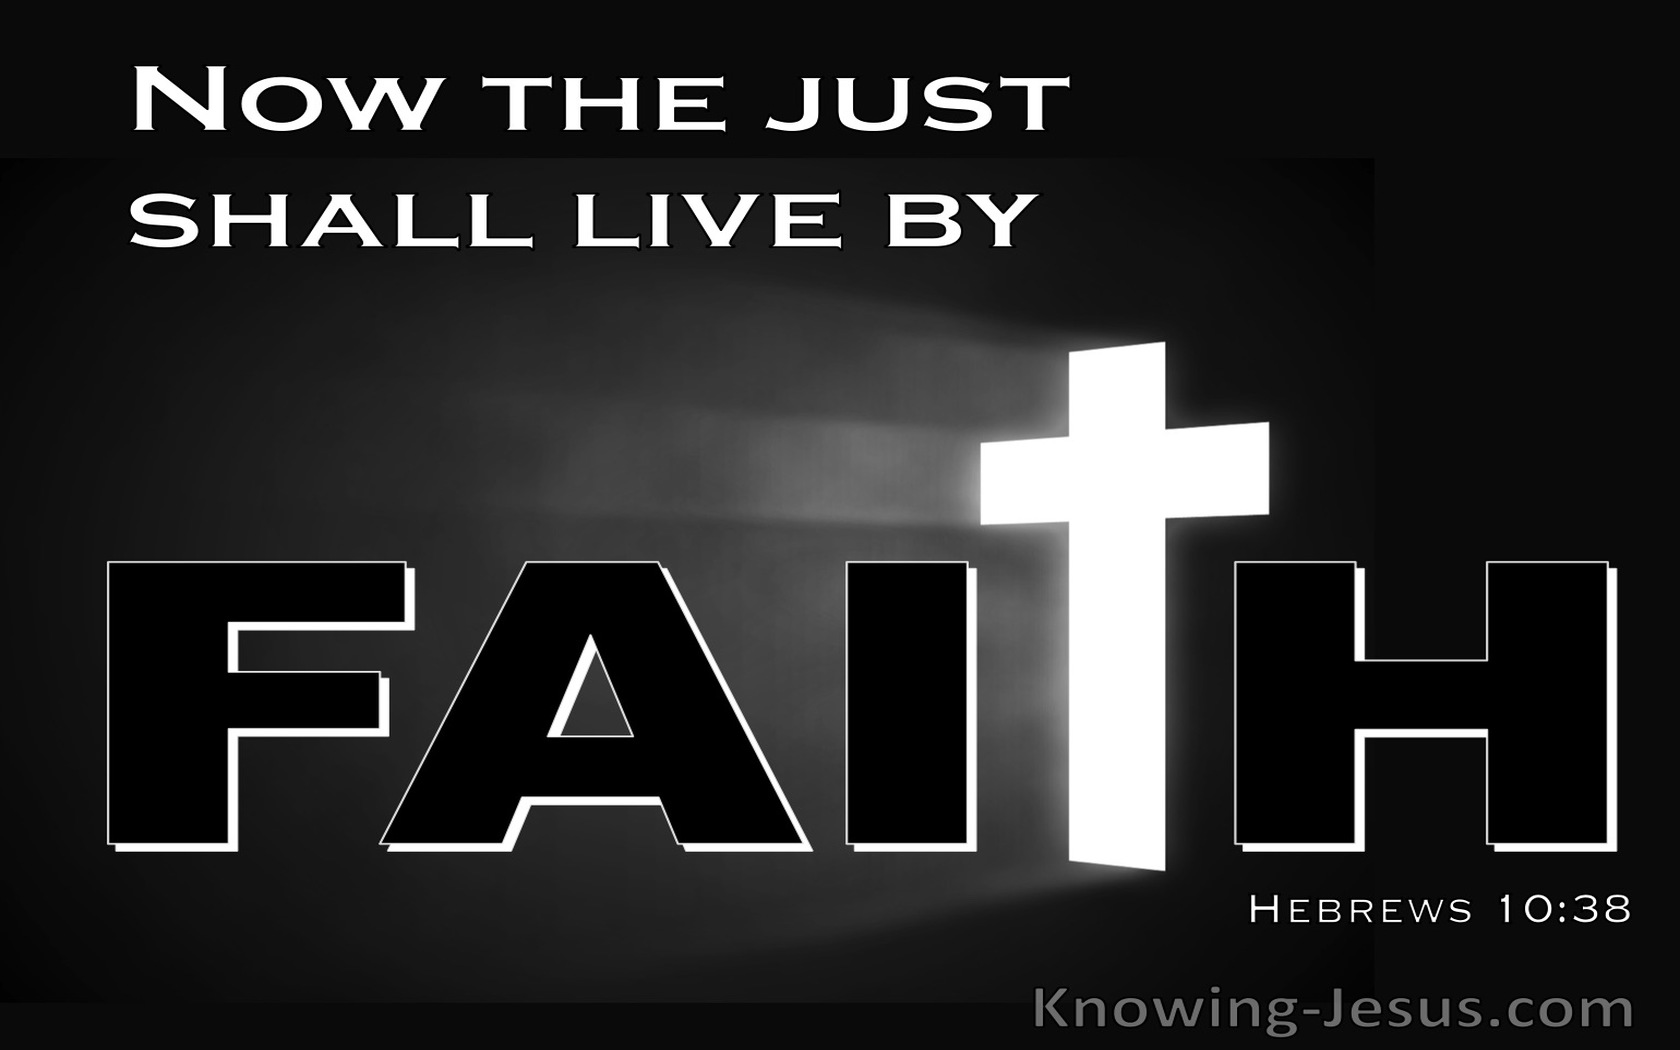 Hebrews 10:38 The Just Shall Live By Faith (white)